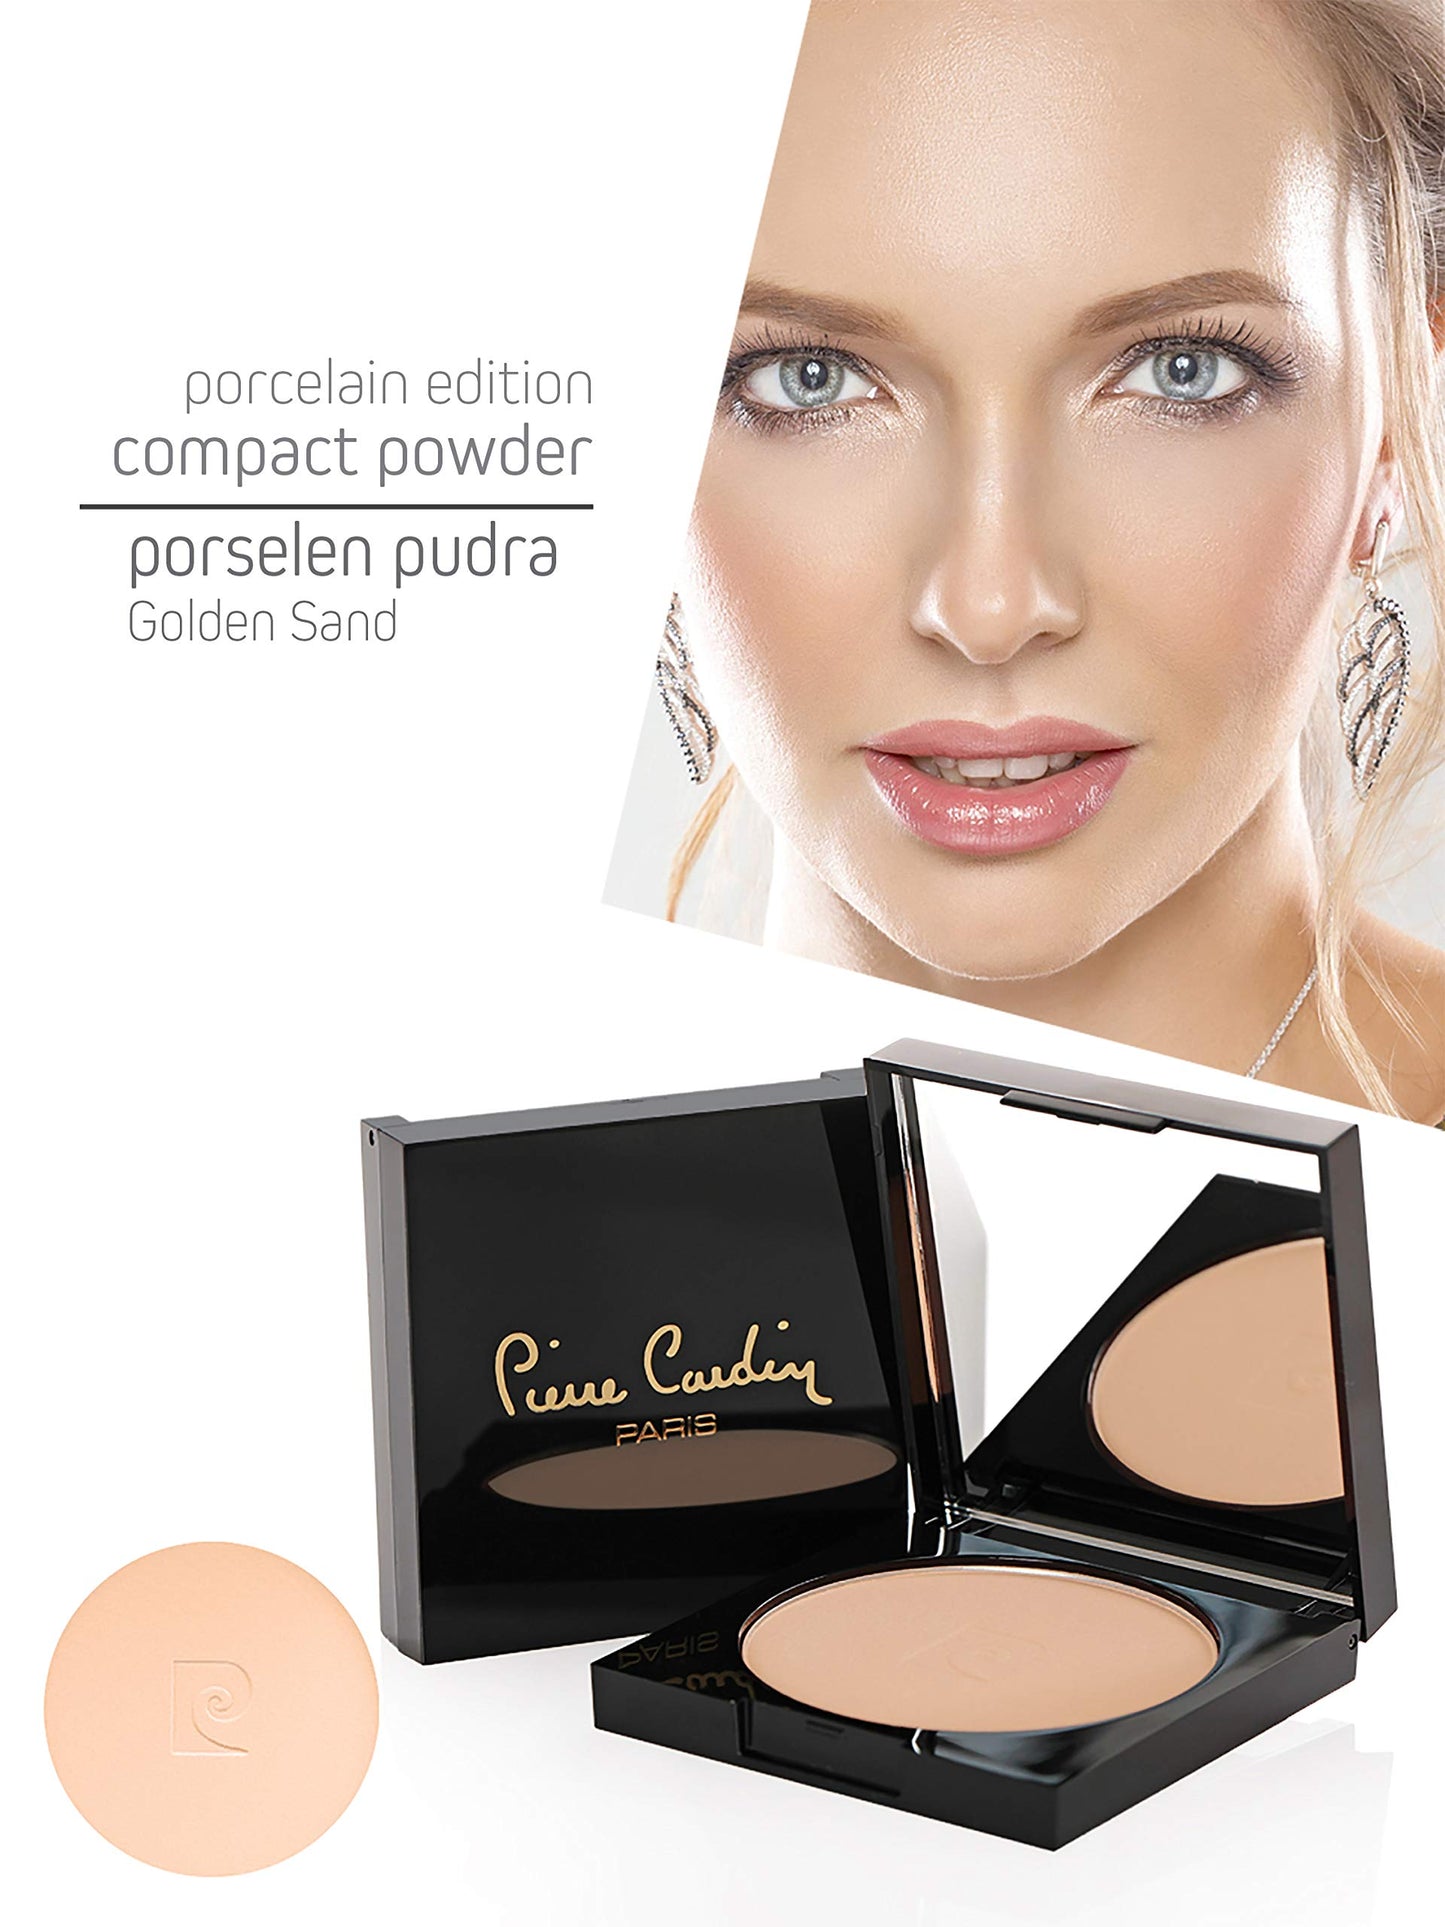 Pierre Cardin Paris, Porcelain Edition Campact Powder, Bright Perfecting Finish, Flawless & Cashmere Finish, For Oily Skin (160-Golden Sand)